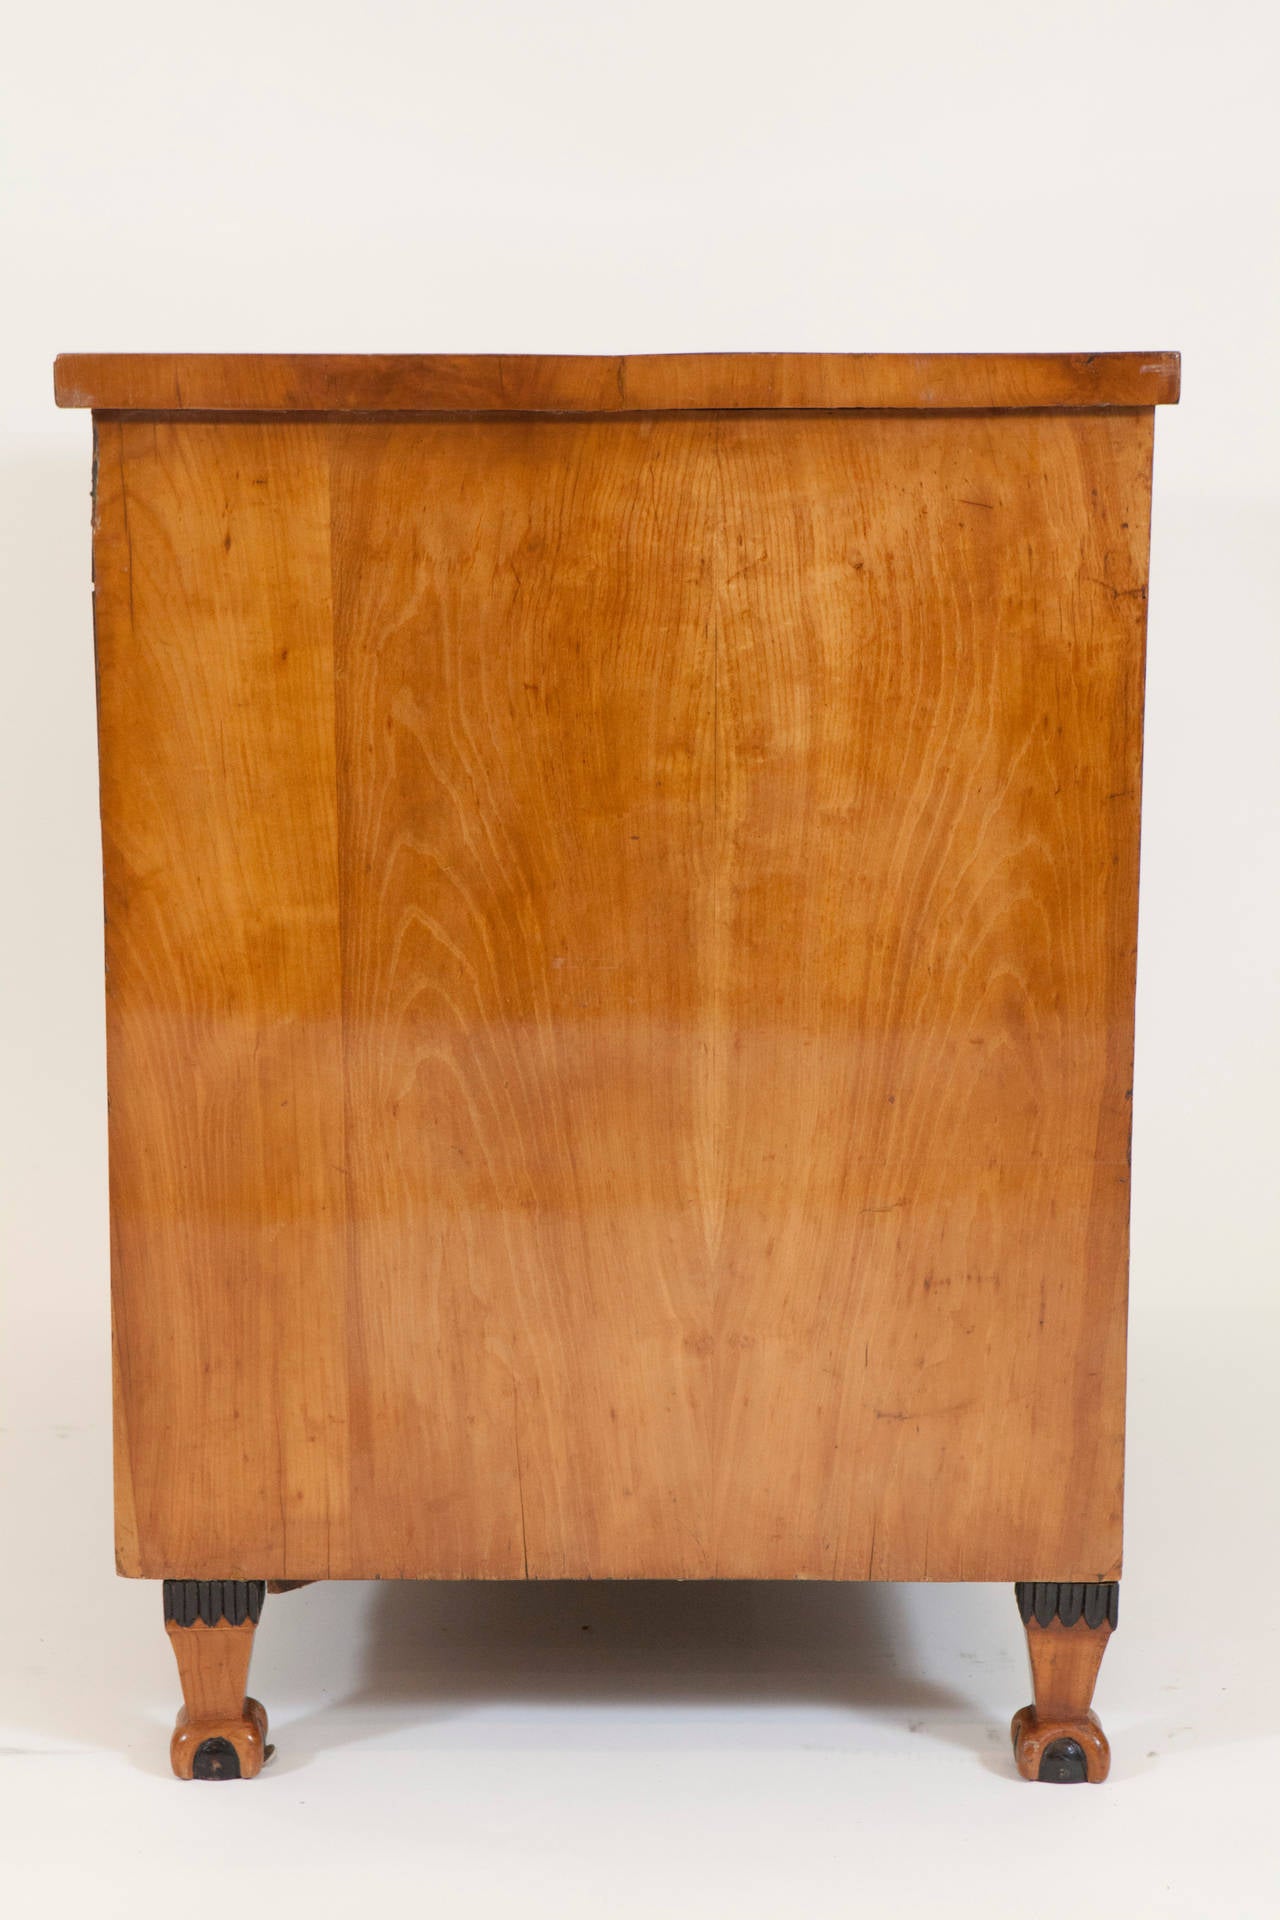 3-DRAWER Biedemeier Commode - An Austrian made piece in cherry wood. Key holes in each drawer.